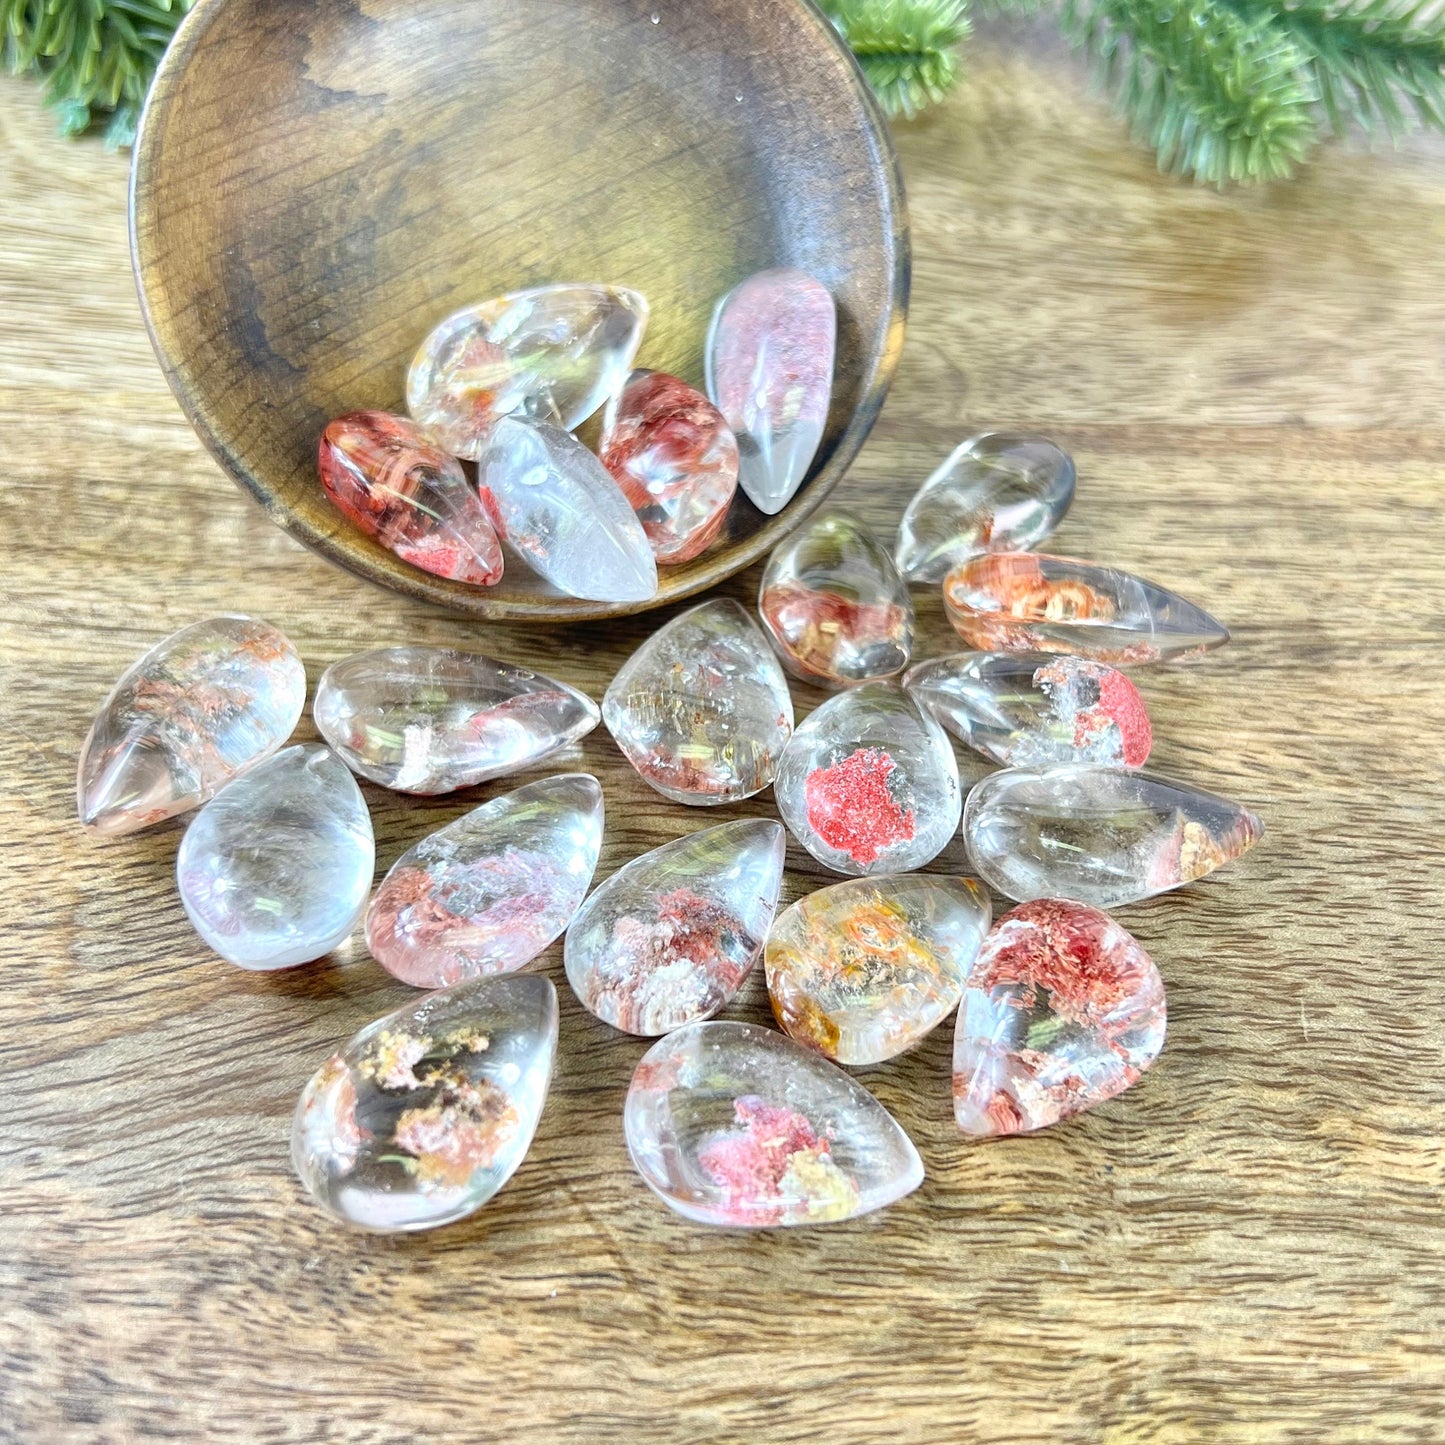 a group of lodolite Garden Quartz with dyed red inclusions in a wooden bowl